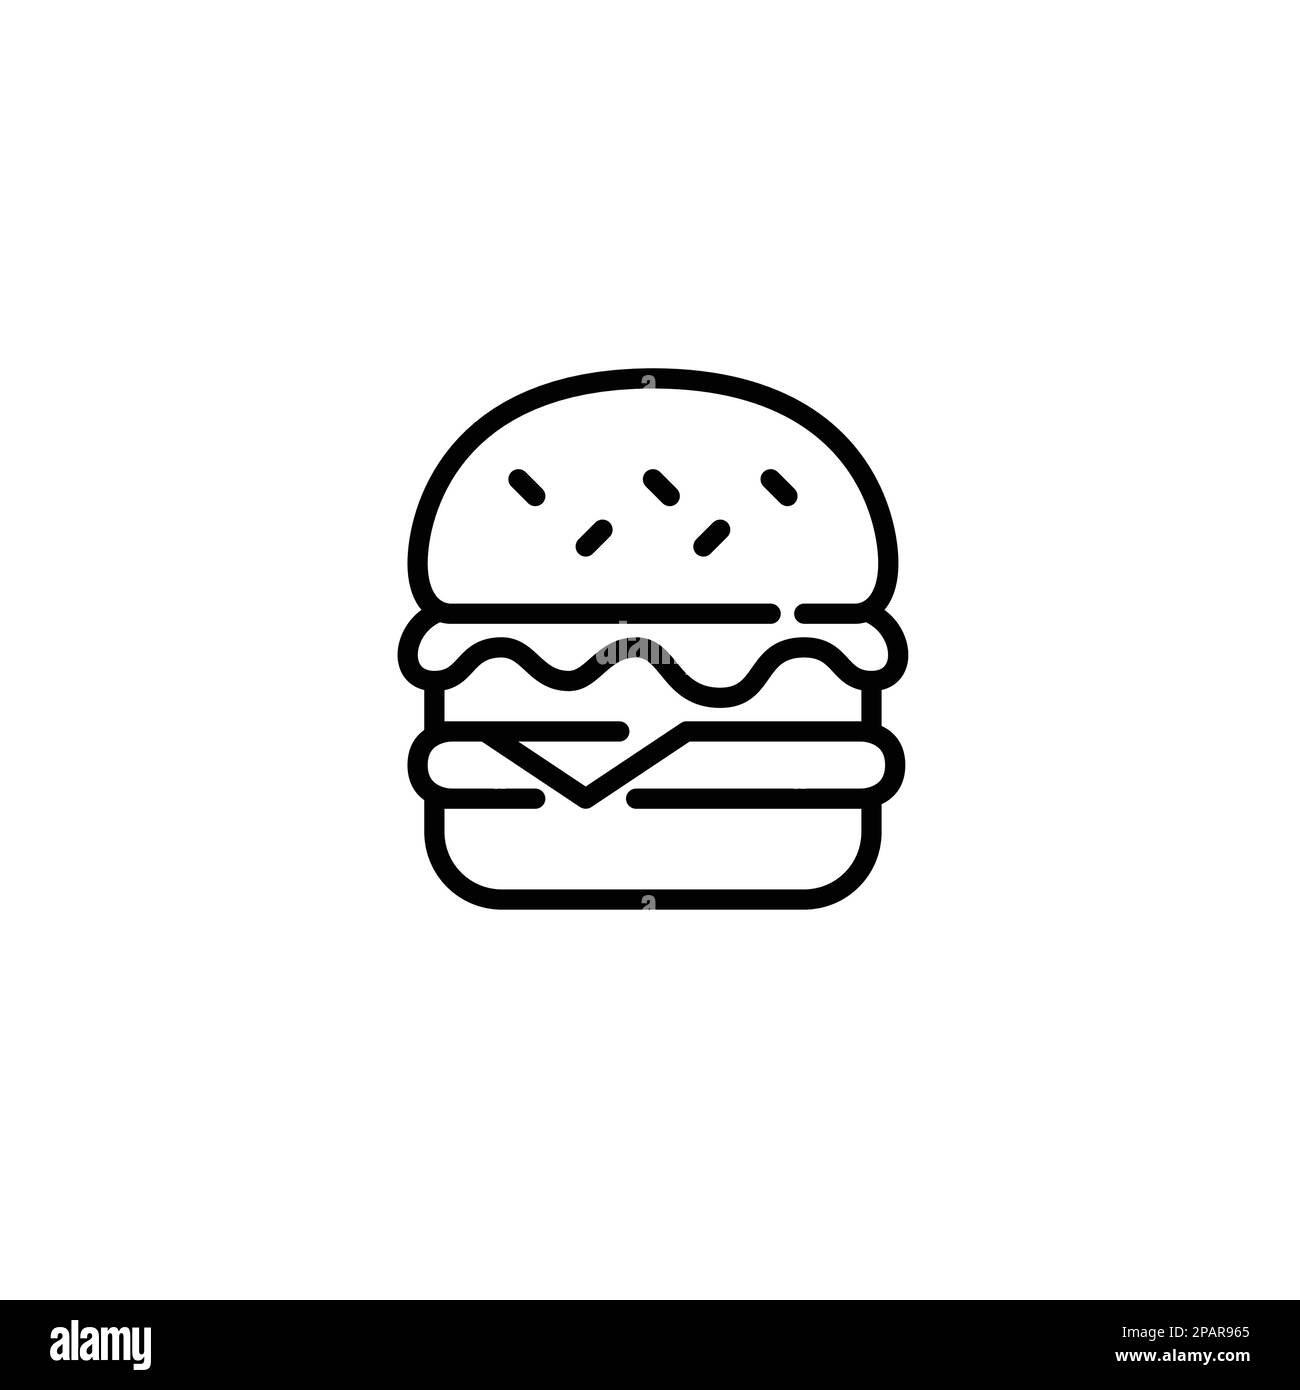 Cheeseburger with lettuce, sesame seed bun. Fast food takeout or dine in lunch. Pixel perfect, editable stroke line icon Stock Vector